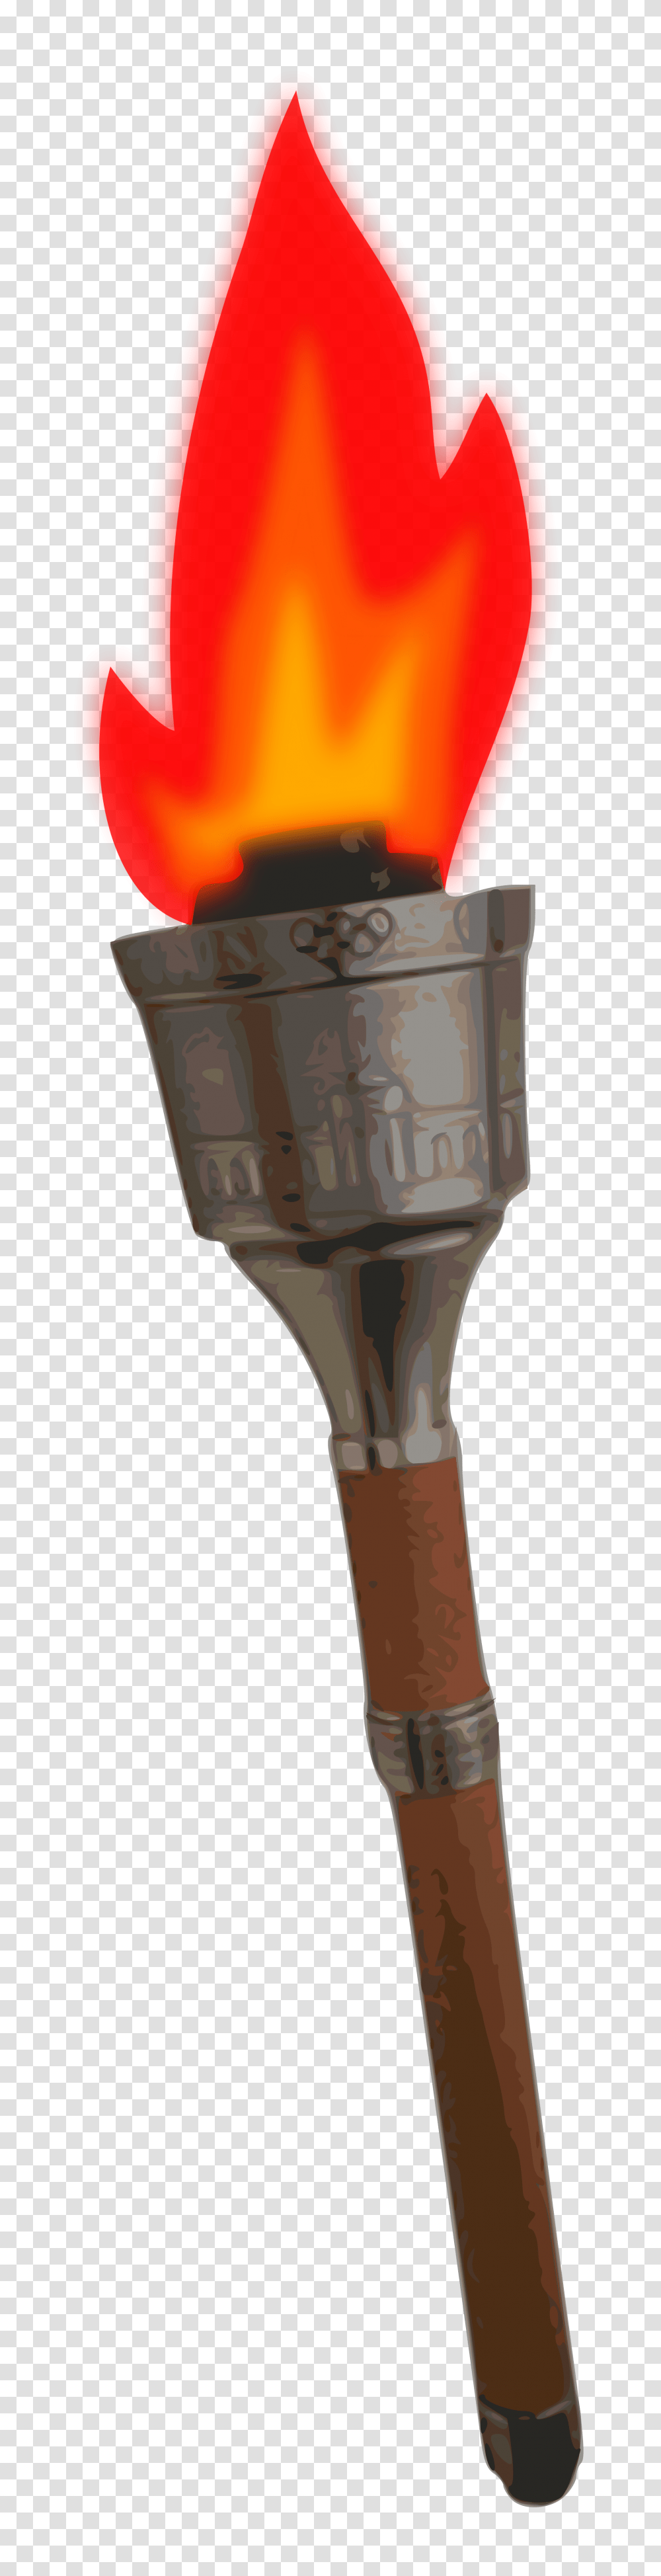 Olympic Torch, Goblet, Glass, Hammer, Tool Transparent Png